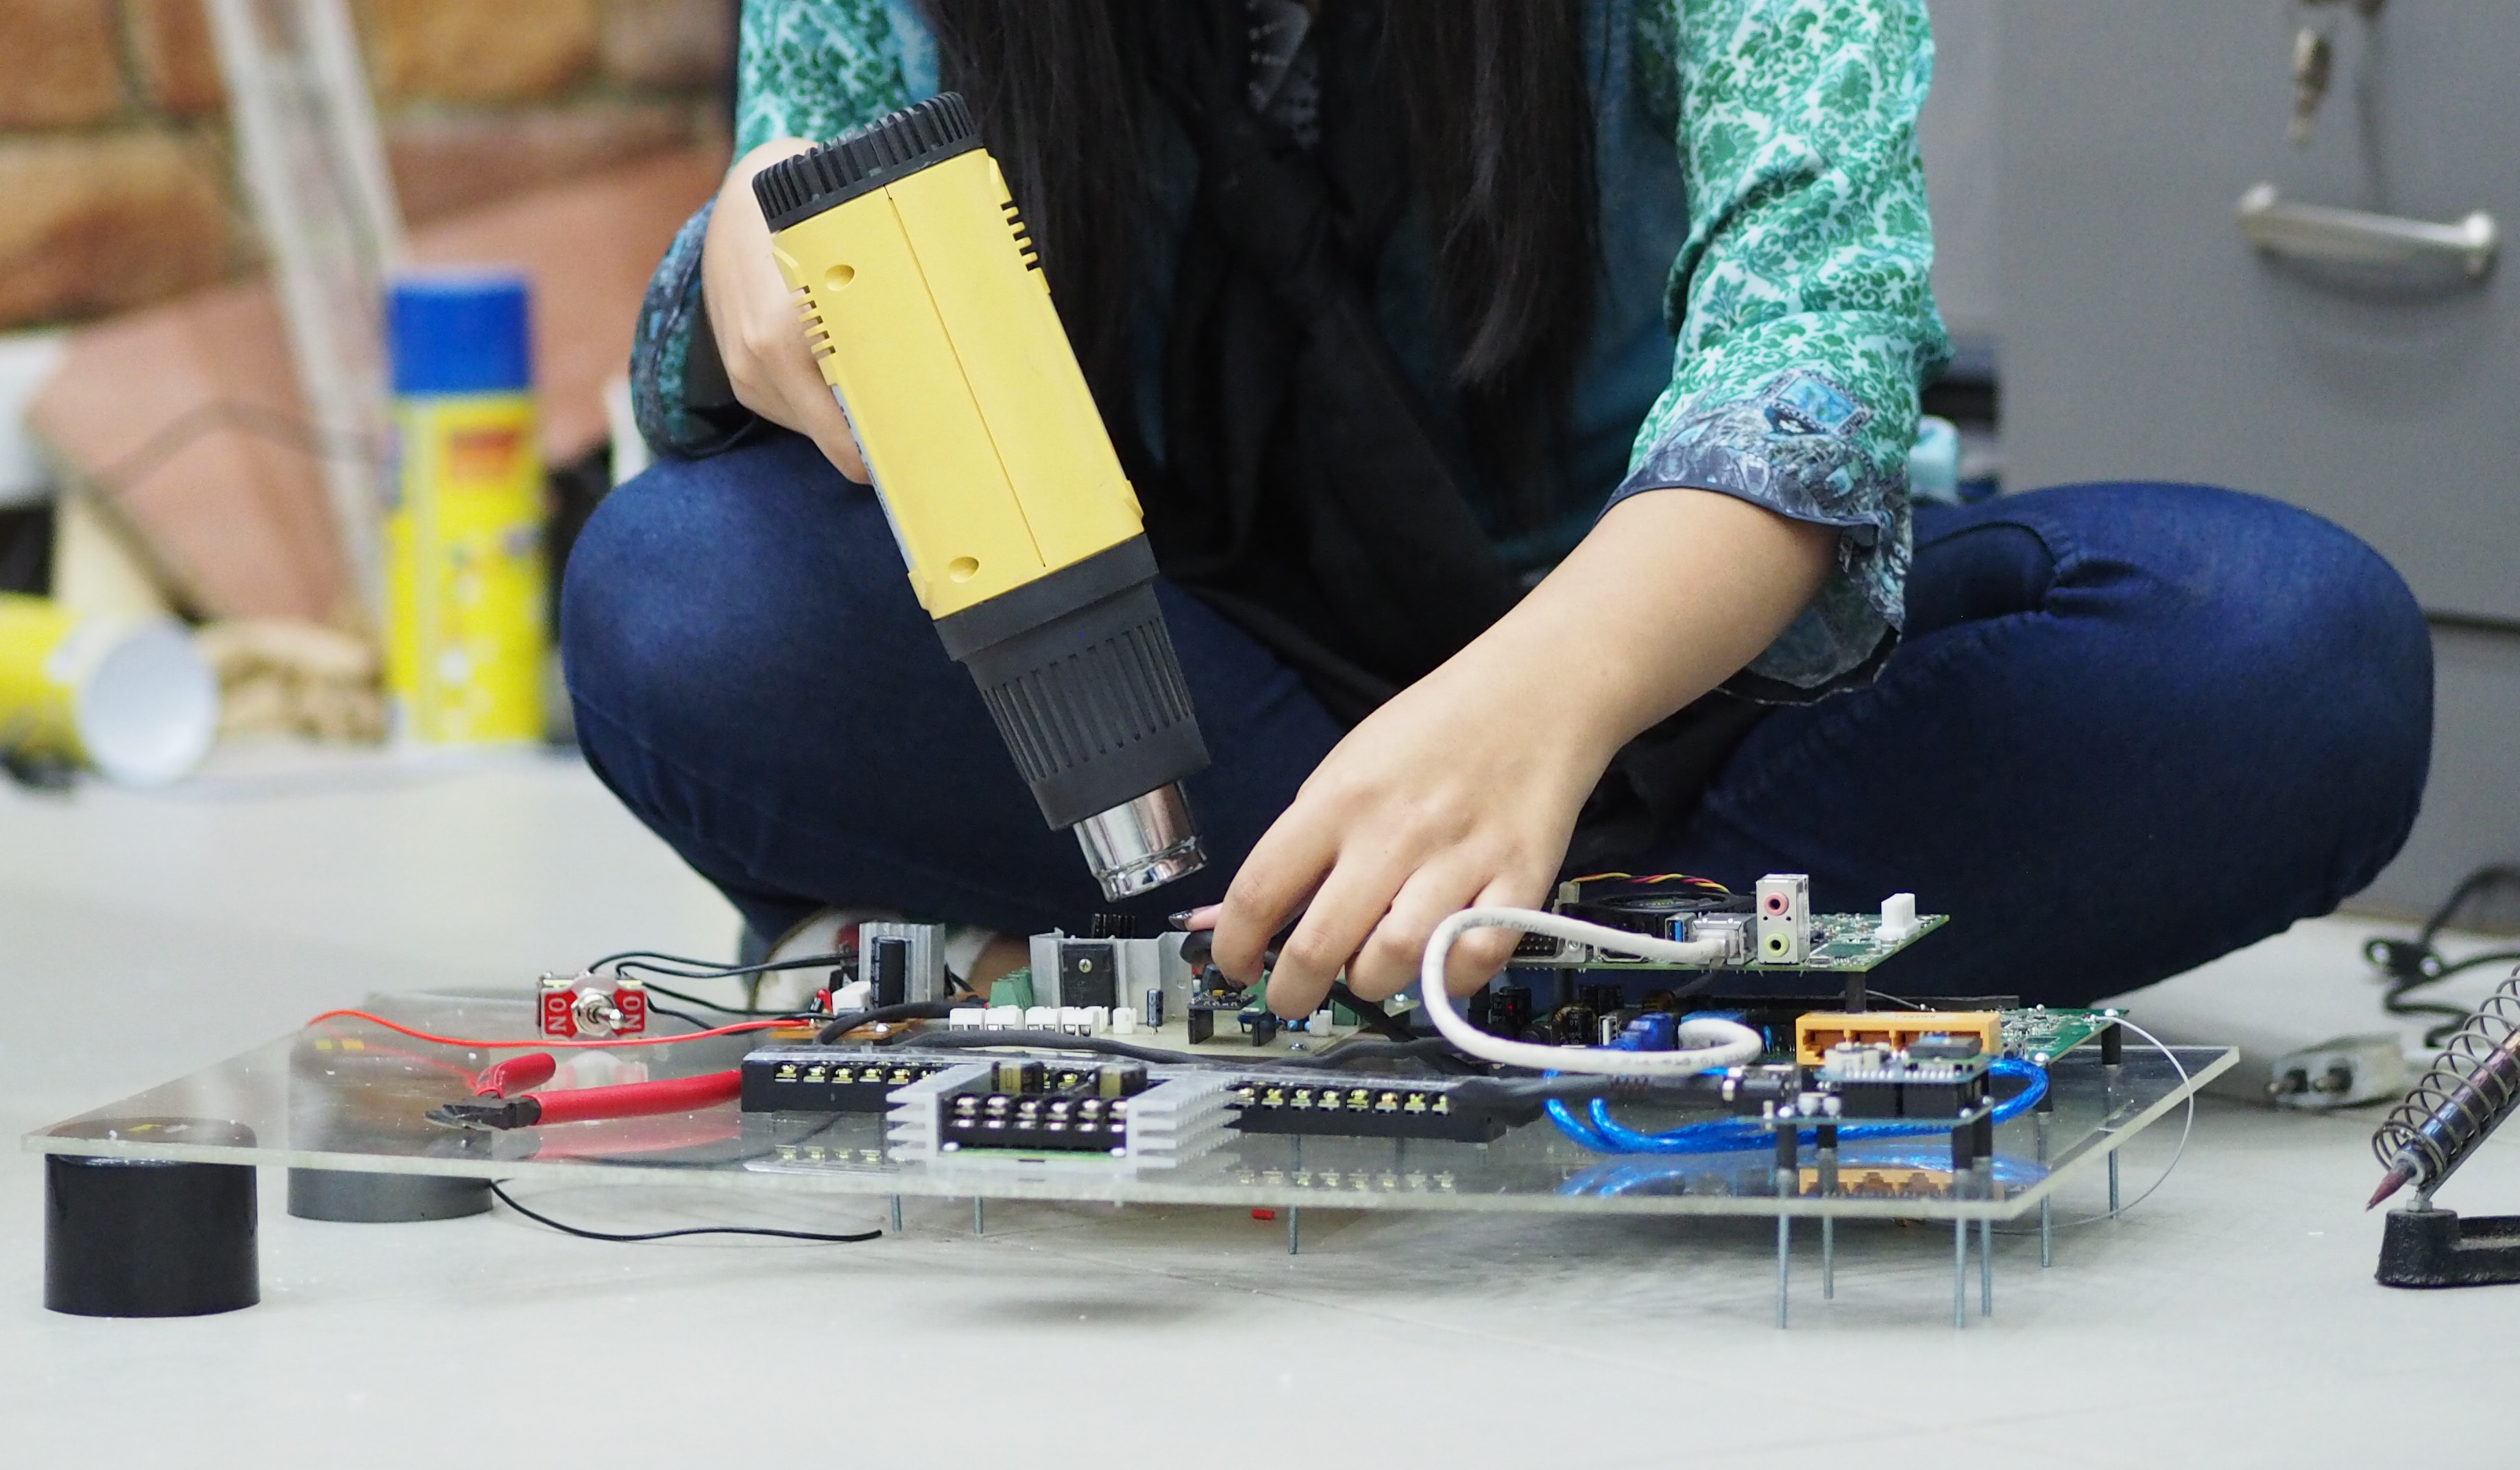 Read more about the article Spotted: Mechatronics Engineer in her Zone